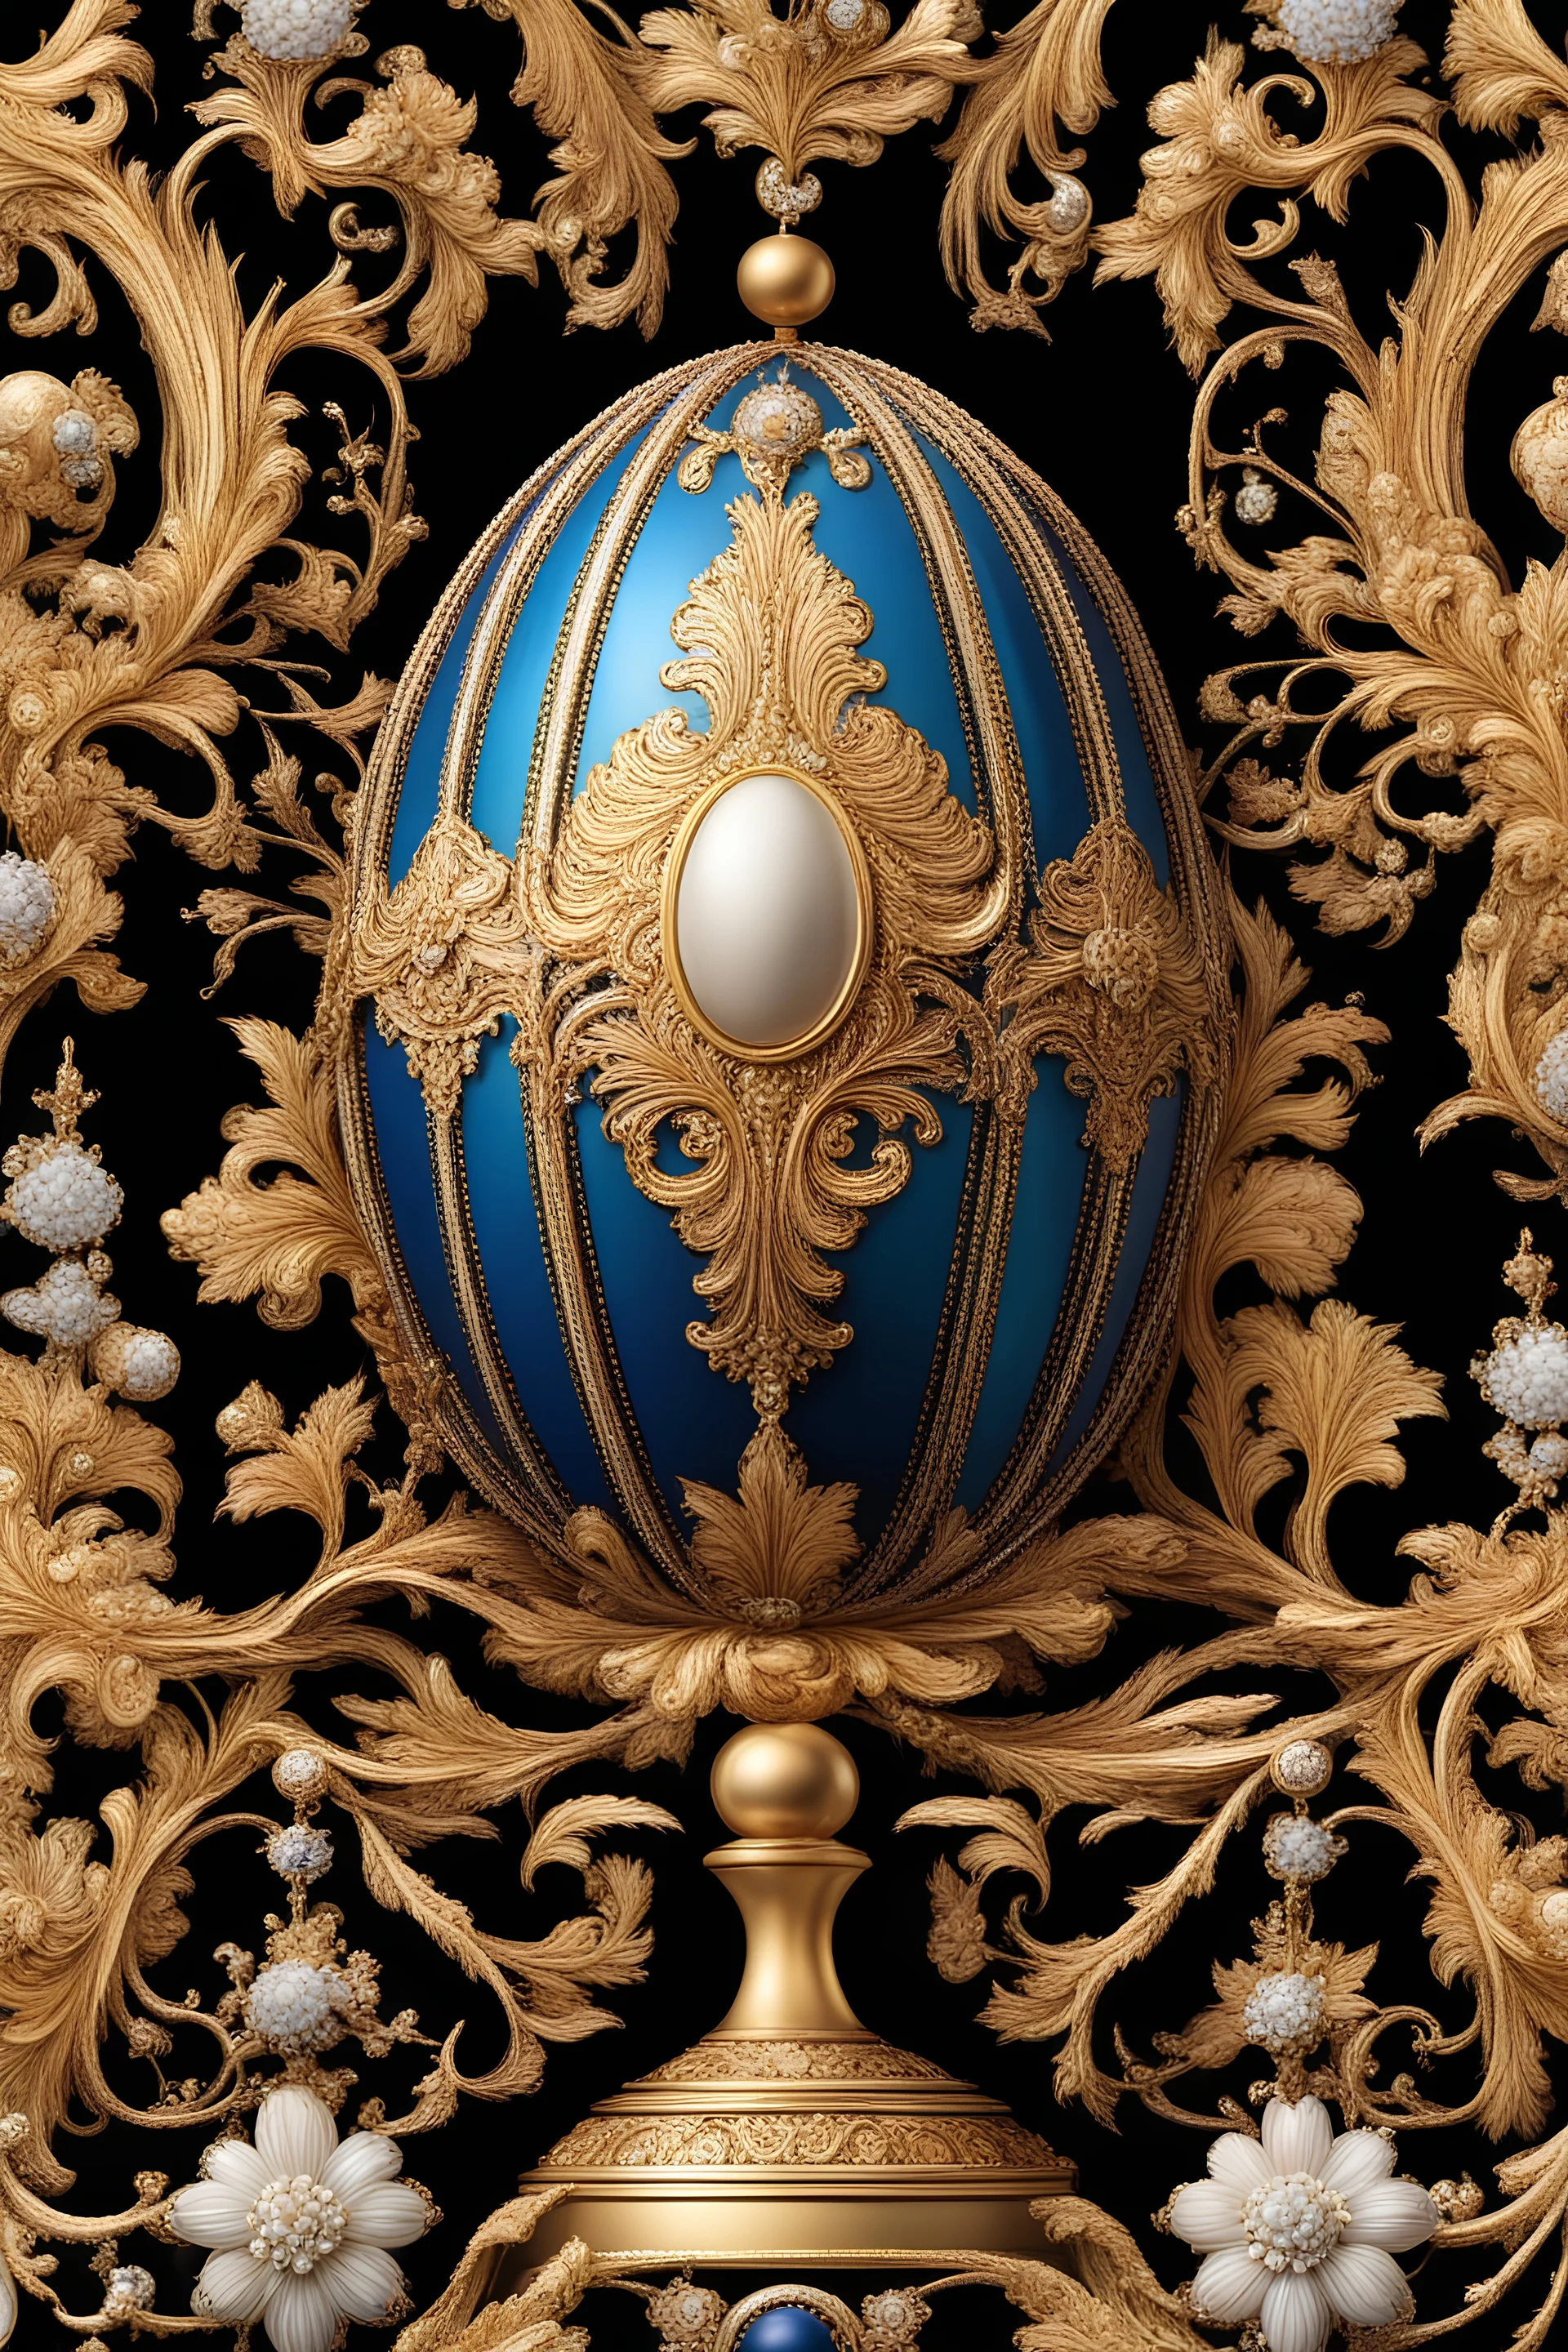 faberge egg richly ornamented